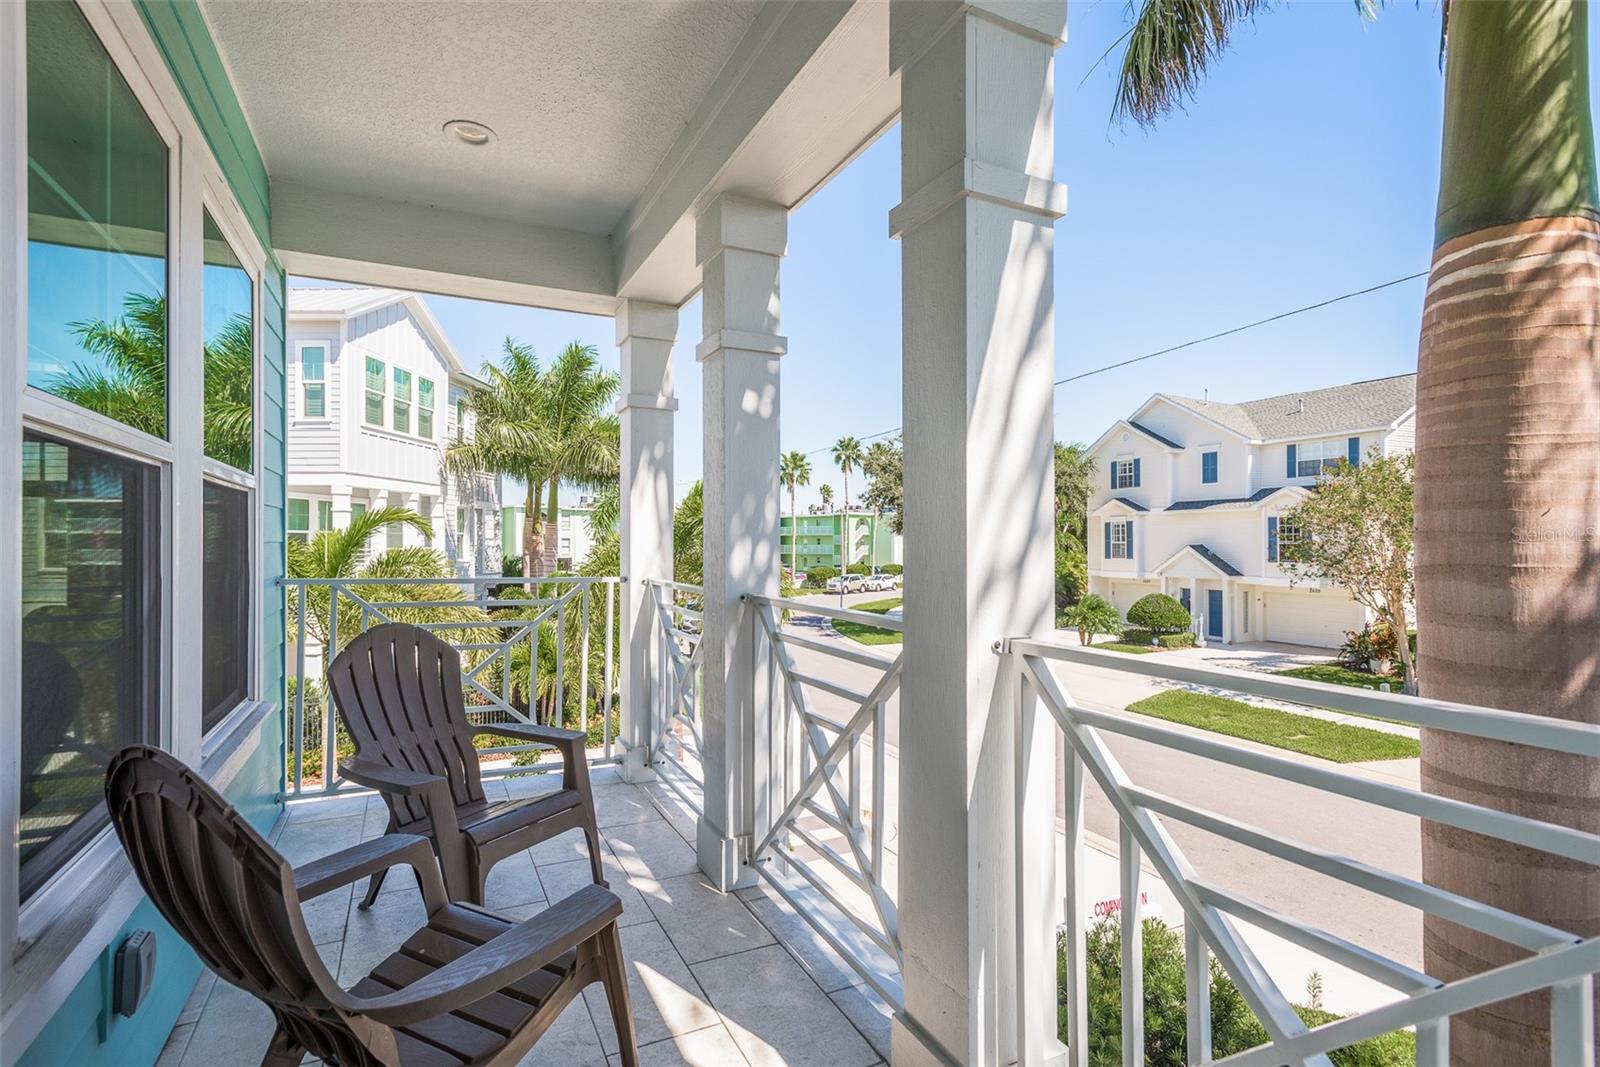 Step onto the rear porch of this coastal haven, where gentle sea breezes mingle with the sounds of the ocean, providing a tranquil outdoor retreat to unwind and enjoy the serenity of coastal living.